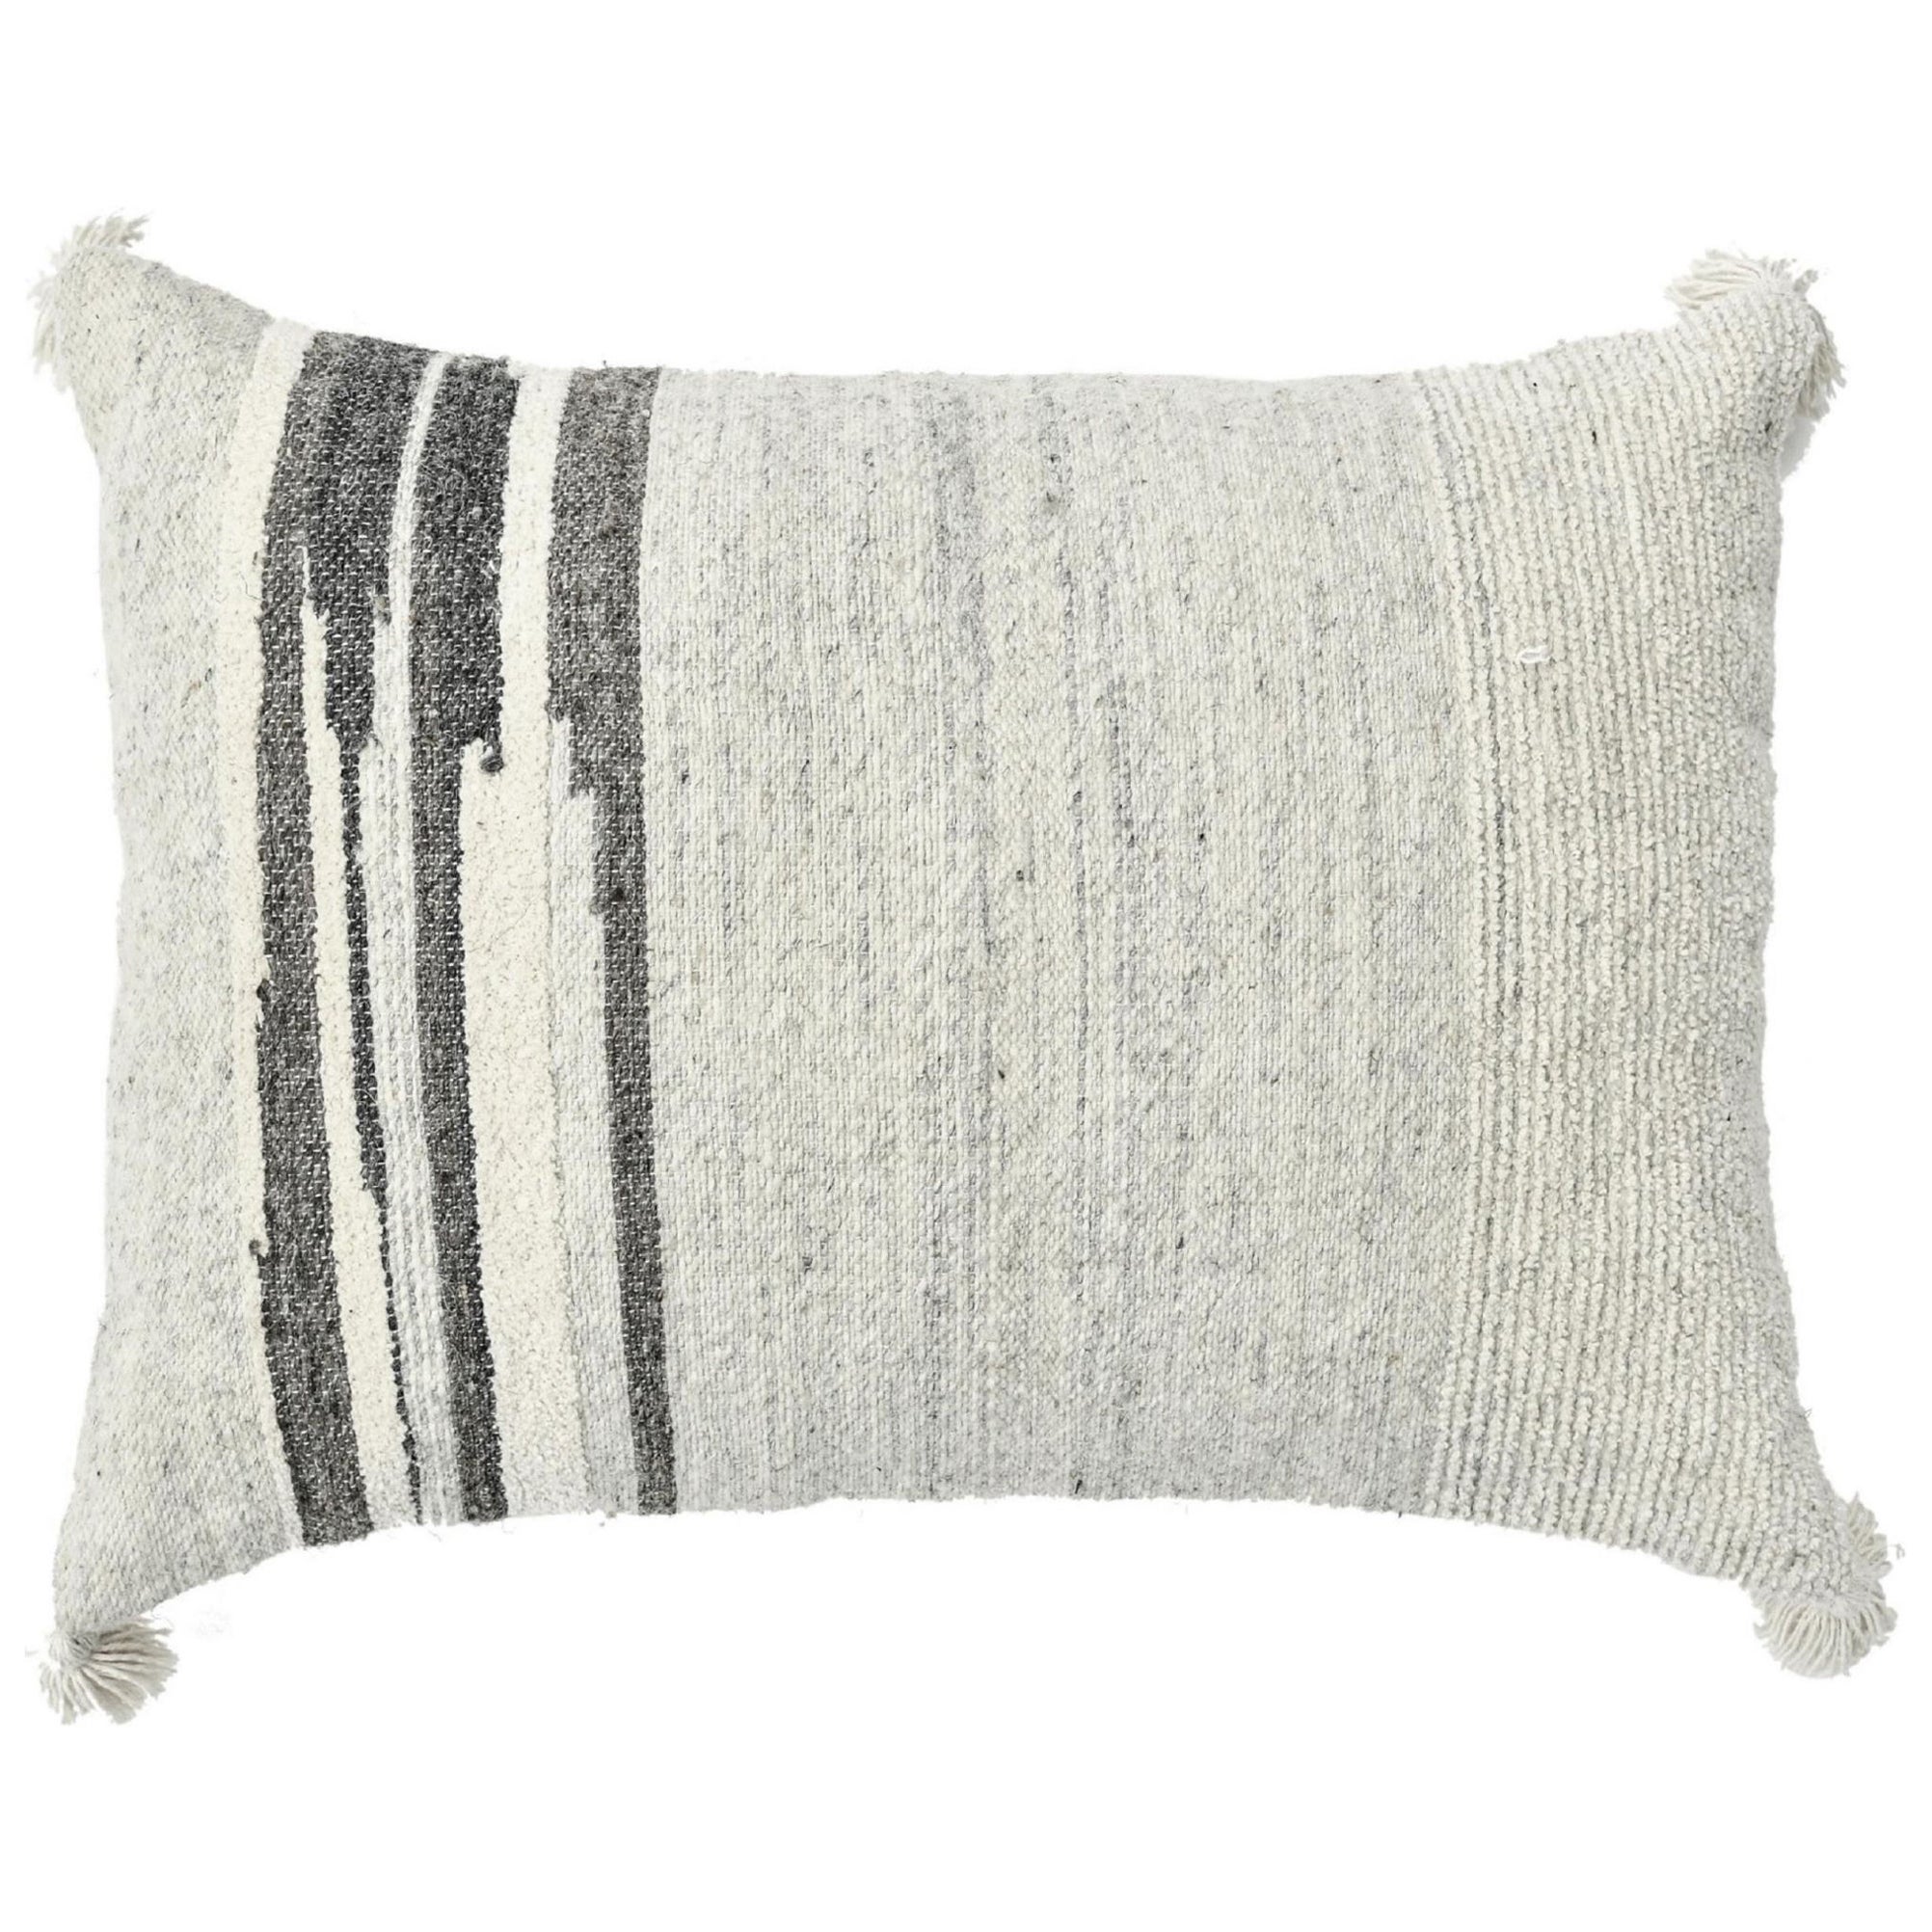 Ivory Modern Boho Chic Style Wool and Cotton Pillow For Sale